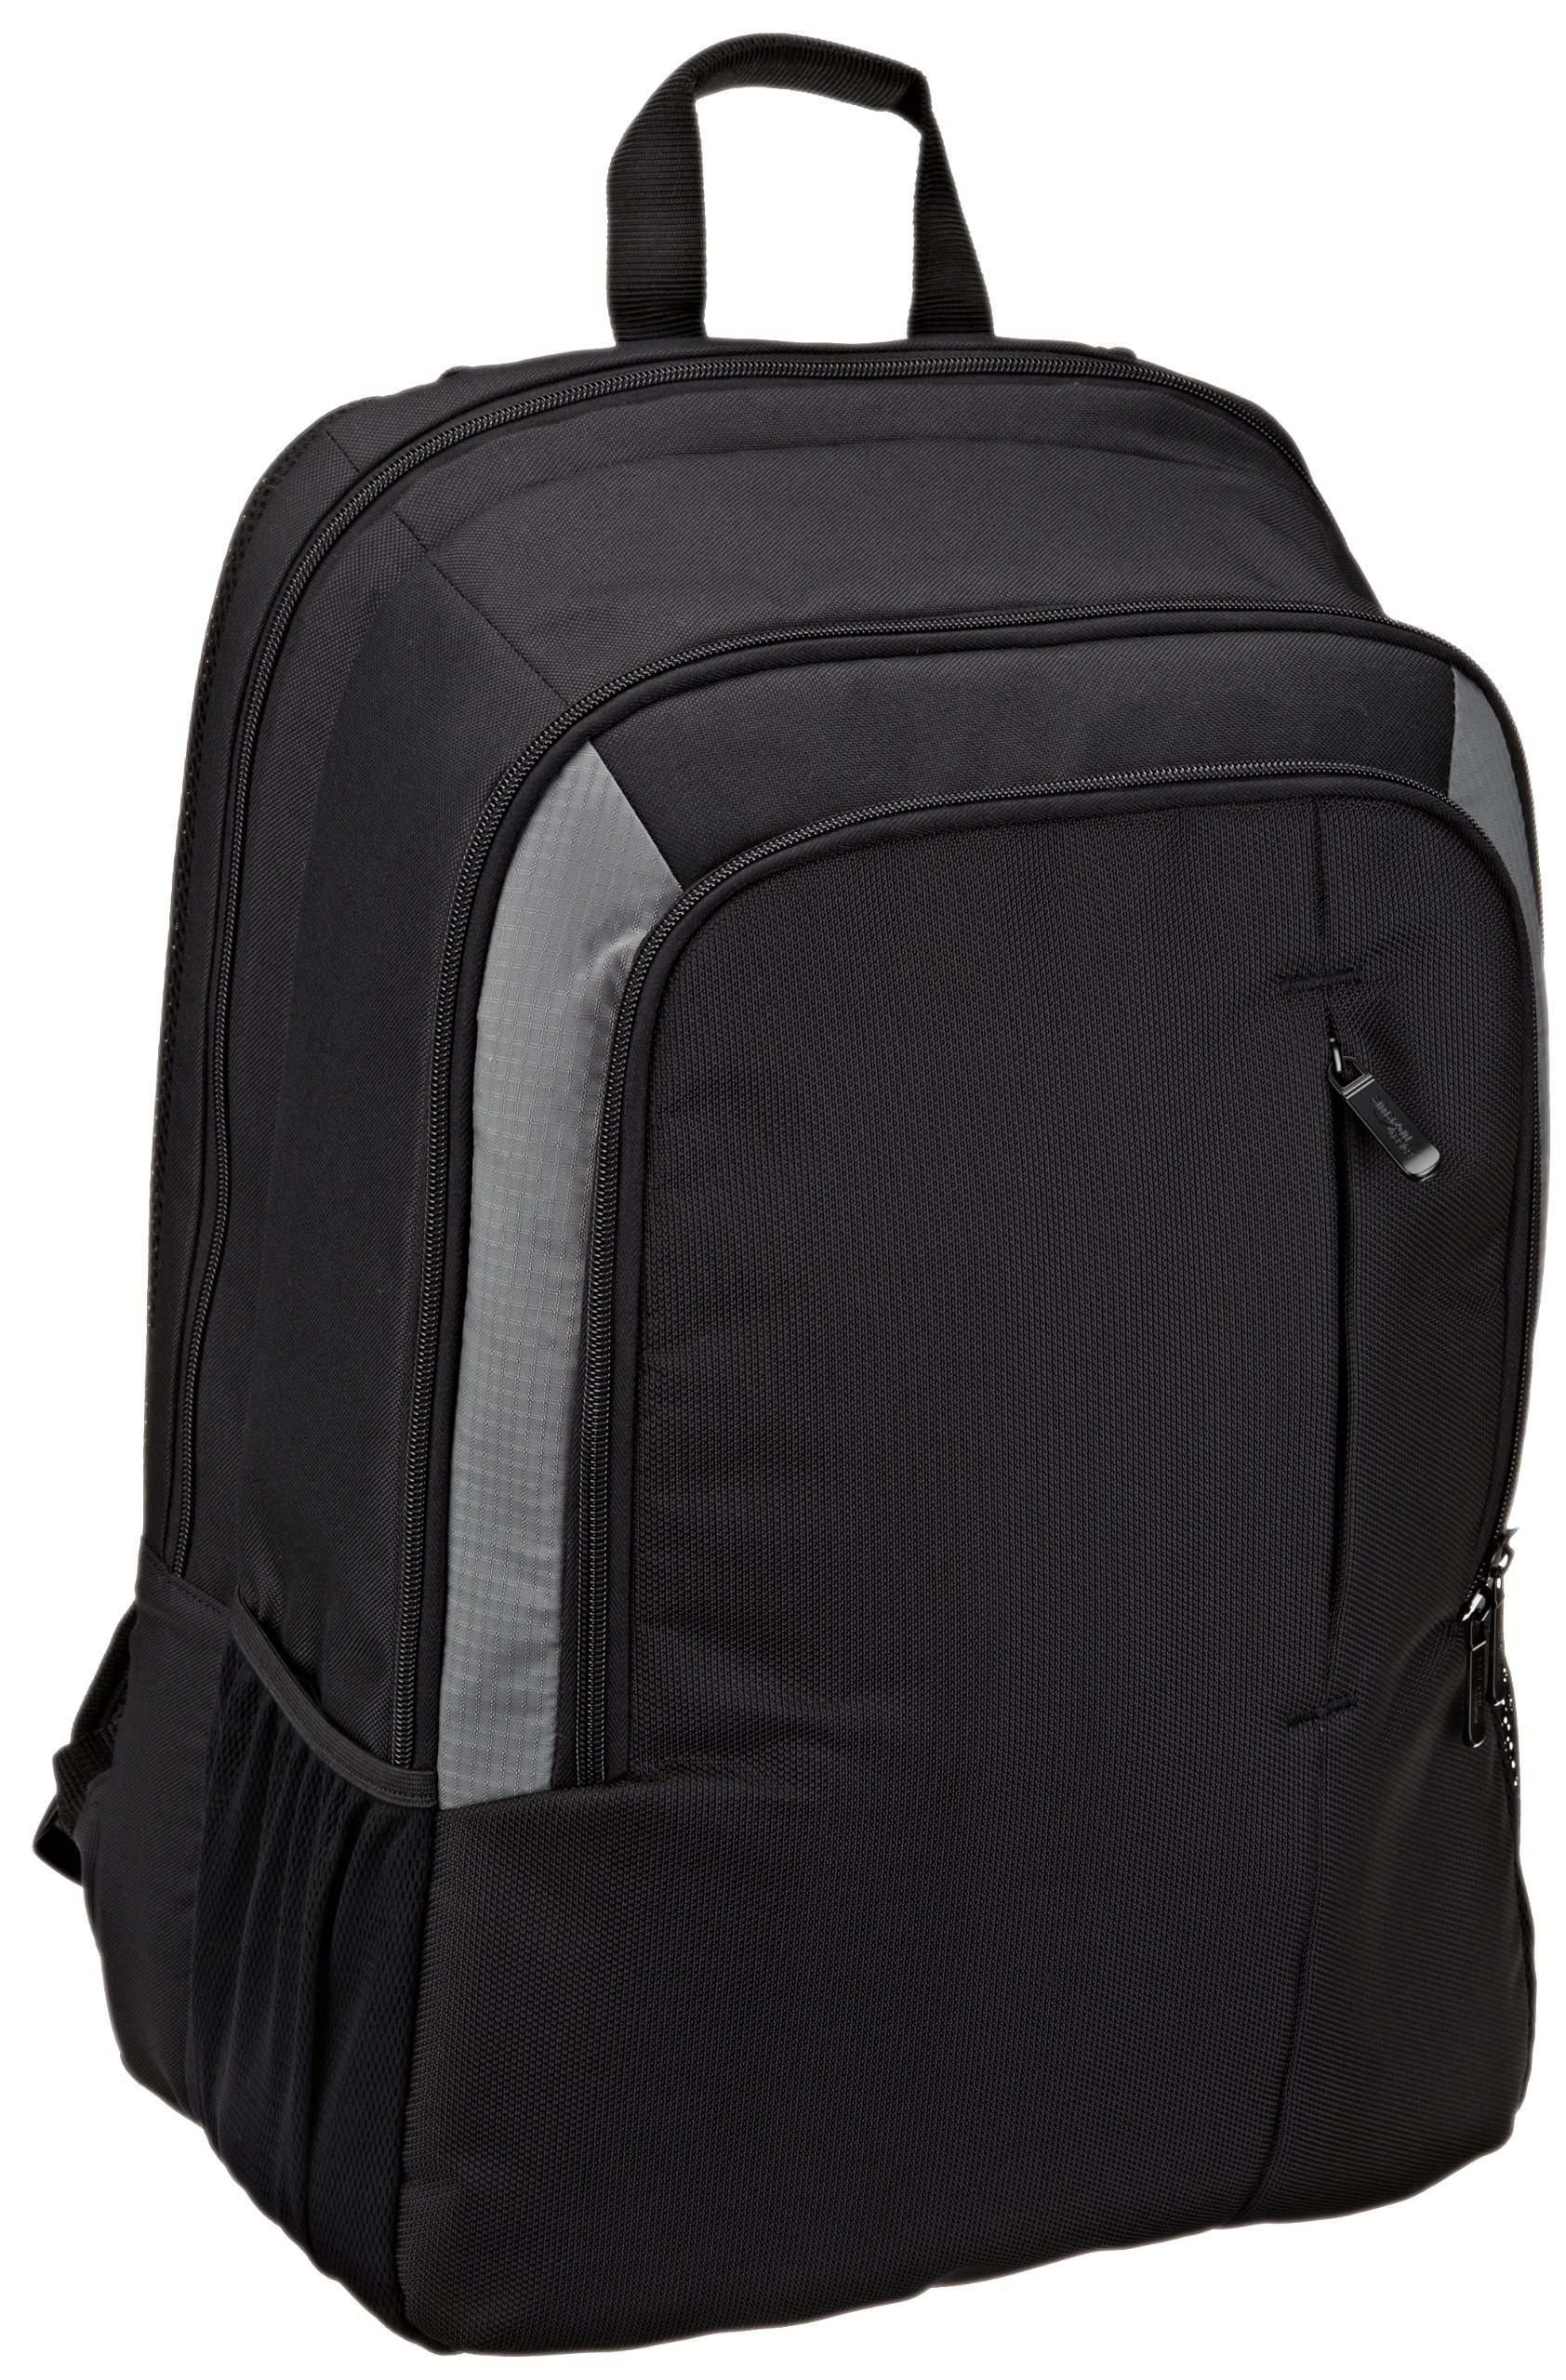 Prime Members: Amazon Basics Laptop Computer Backpack (Fits Up To 15" Laptops) $16.98 + Free Shipping